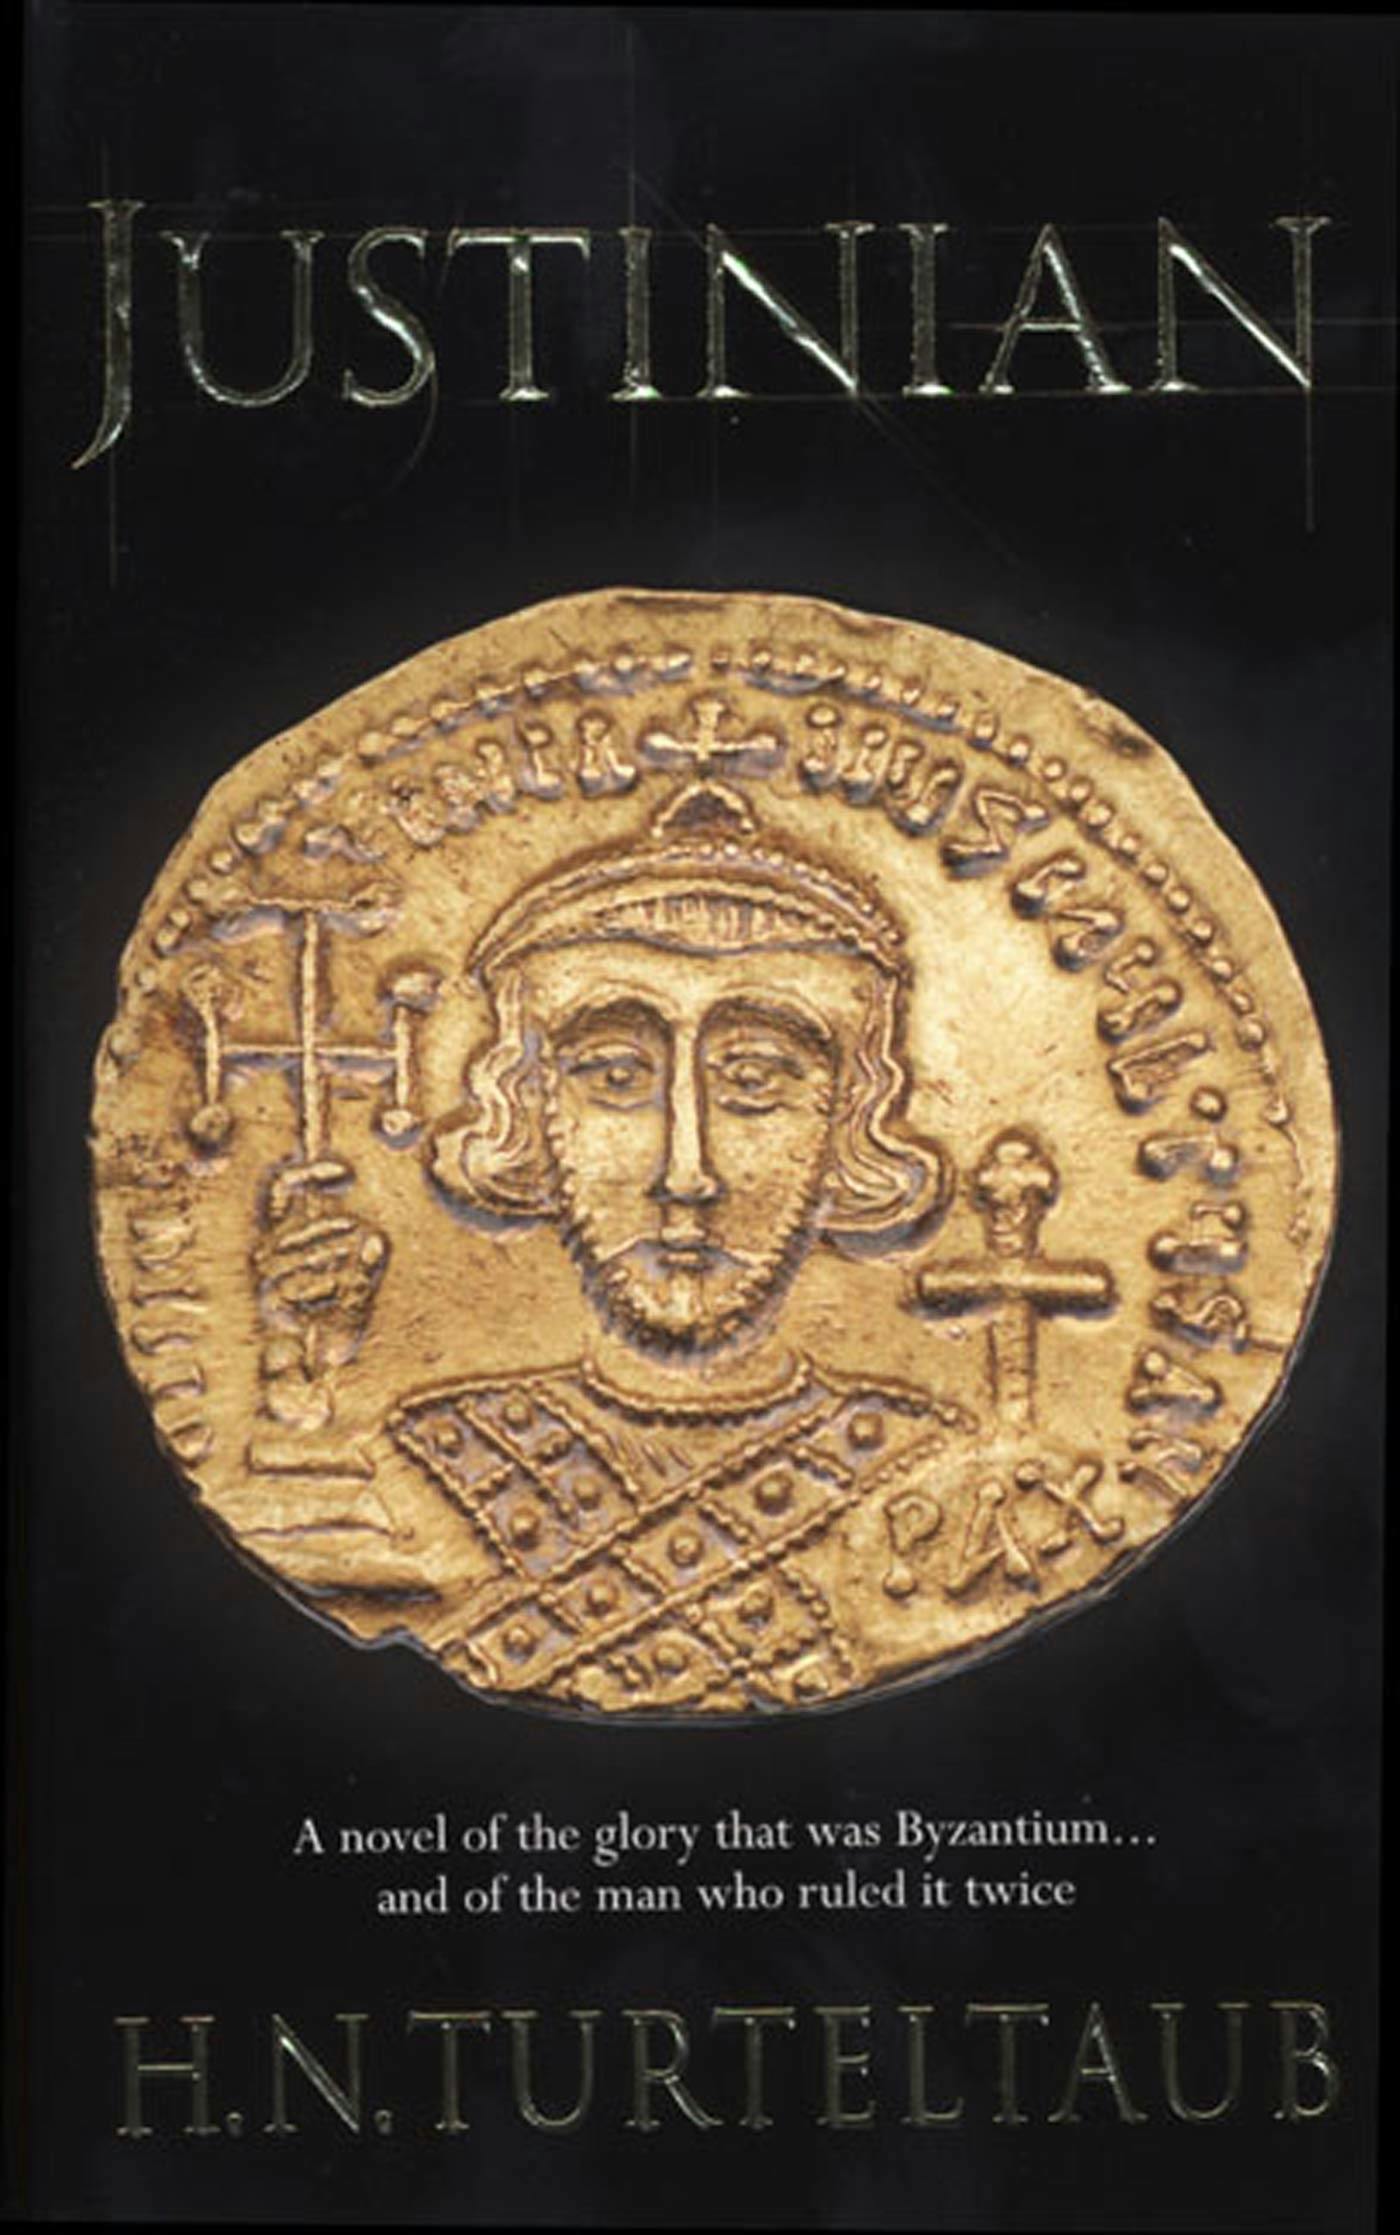 Cover for the book titled as: Justinian